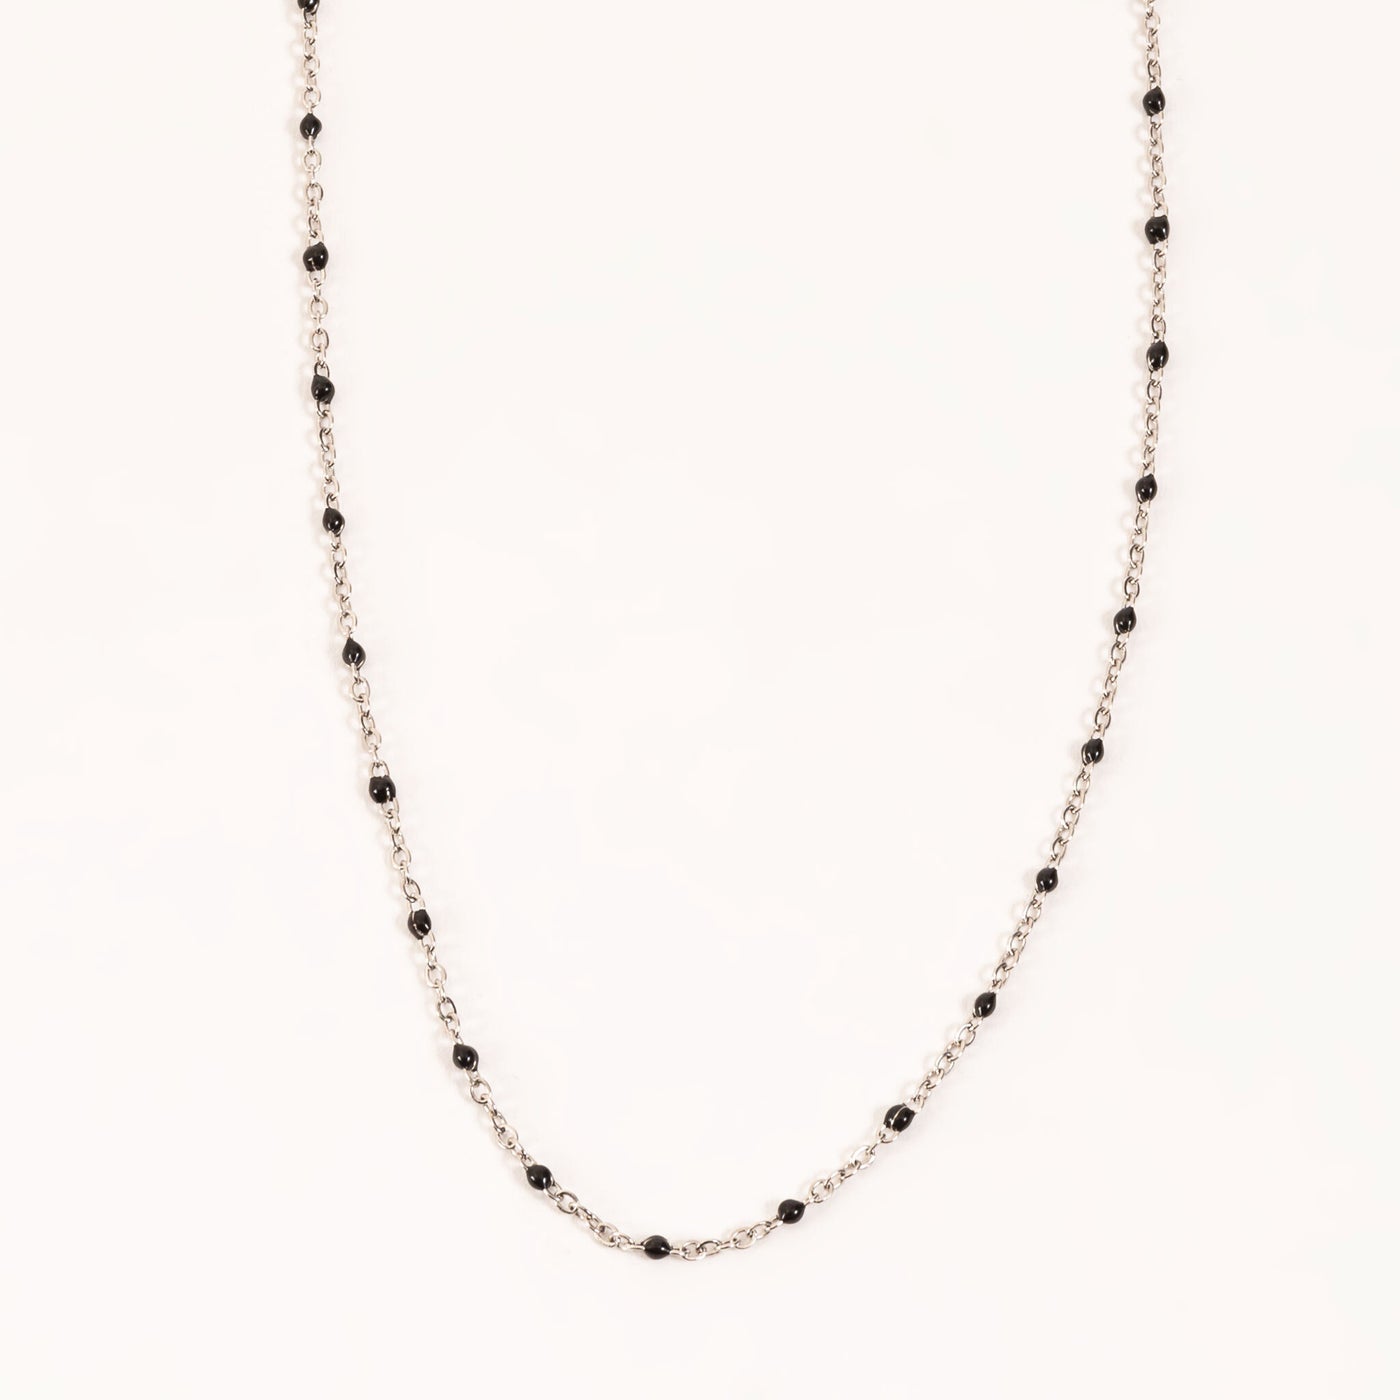 silver chain with black bead along it.